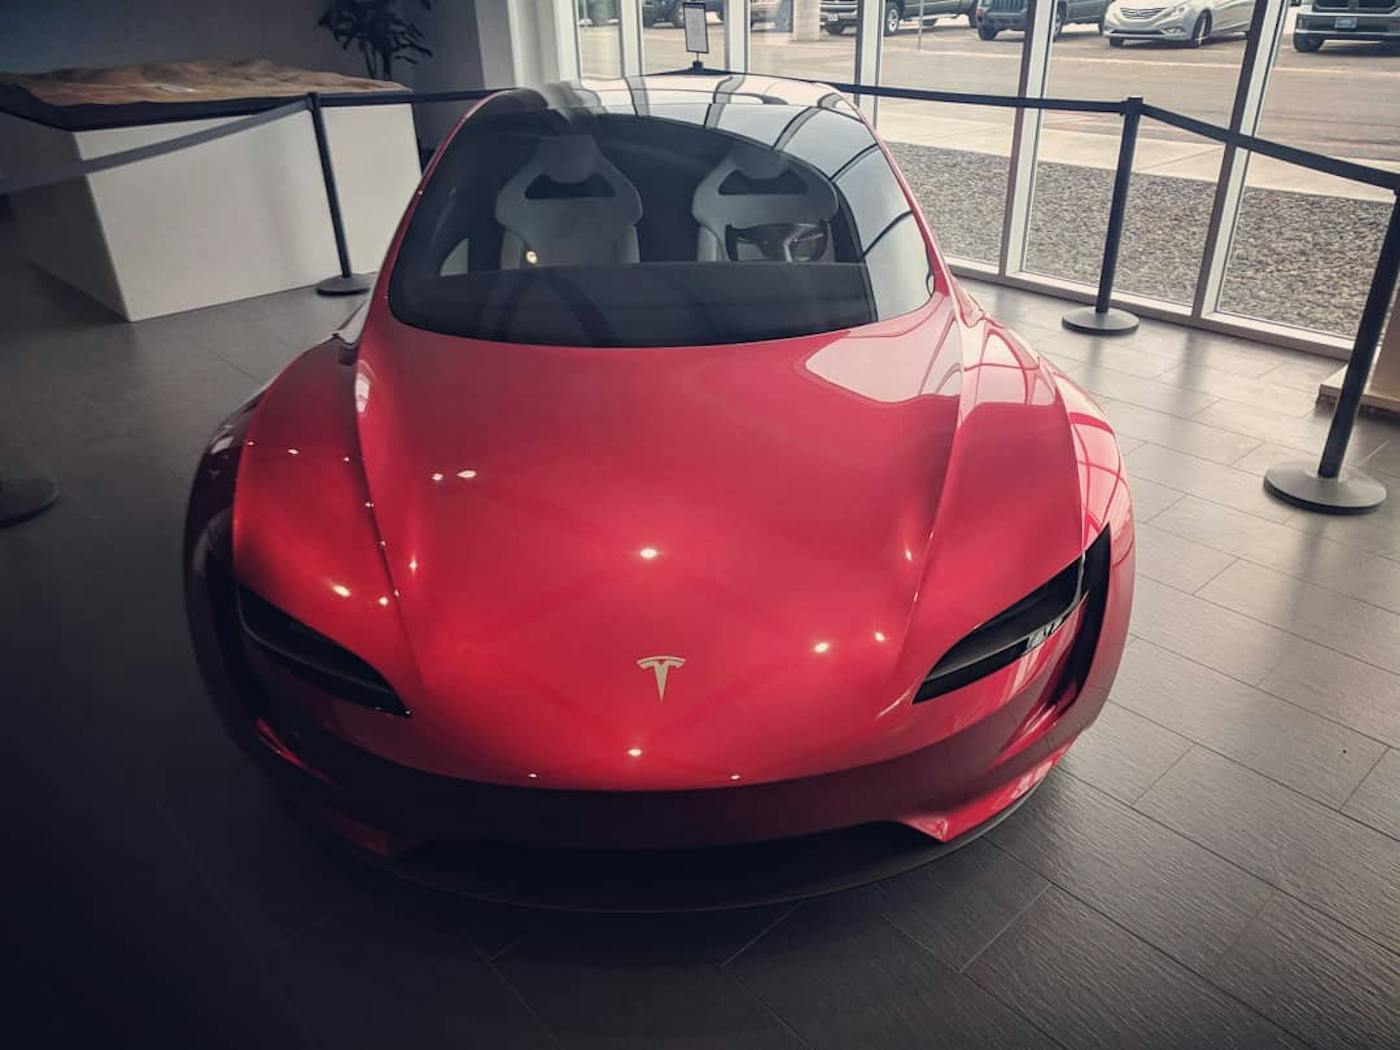 Tesla Roadster 2020 Price And Specs For The Plaid Powered